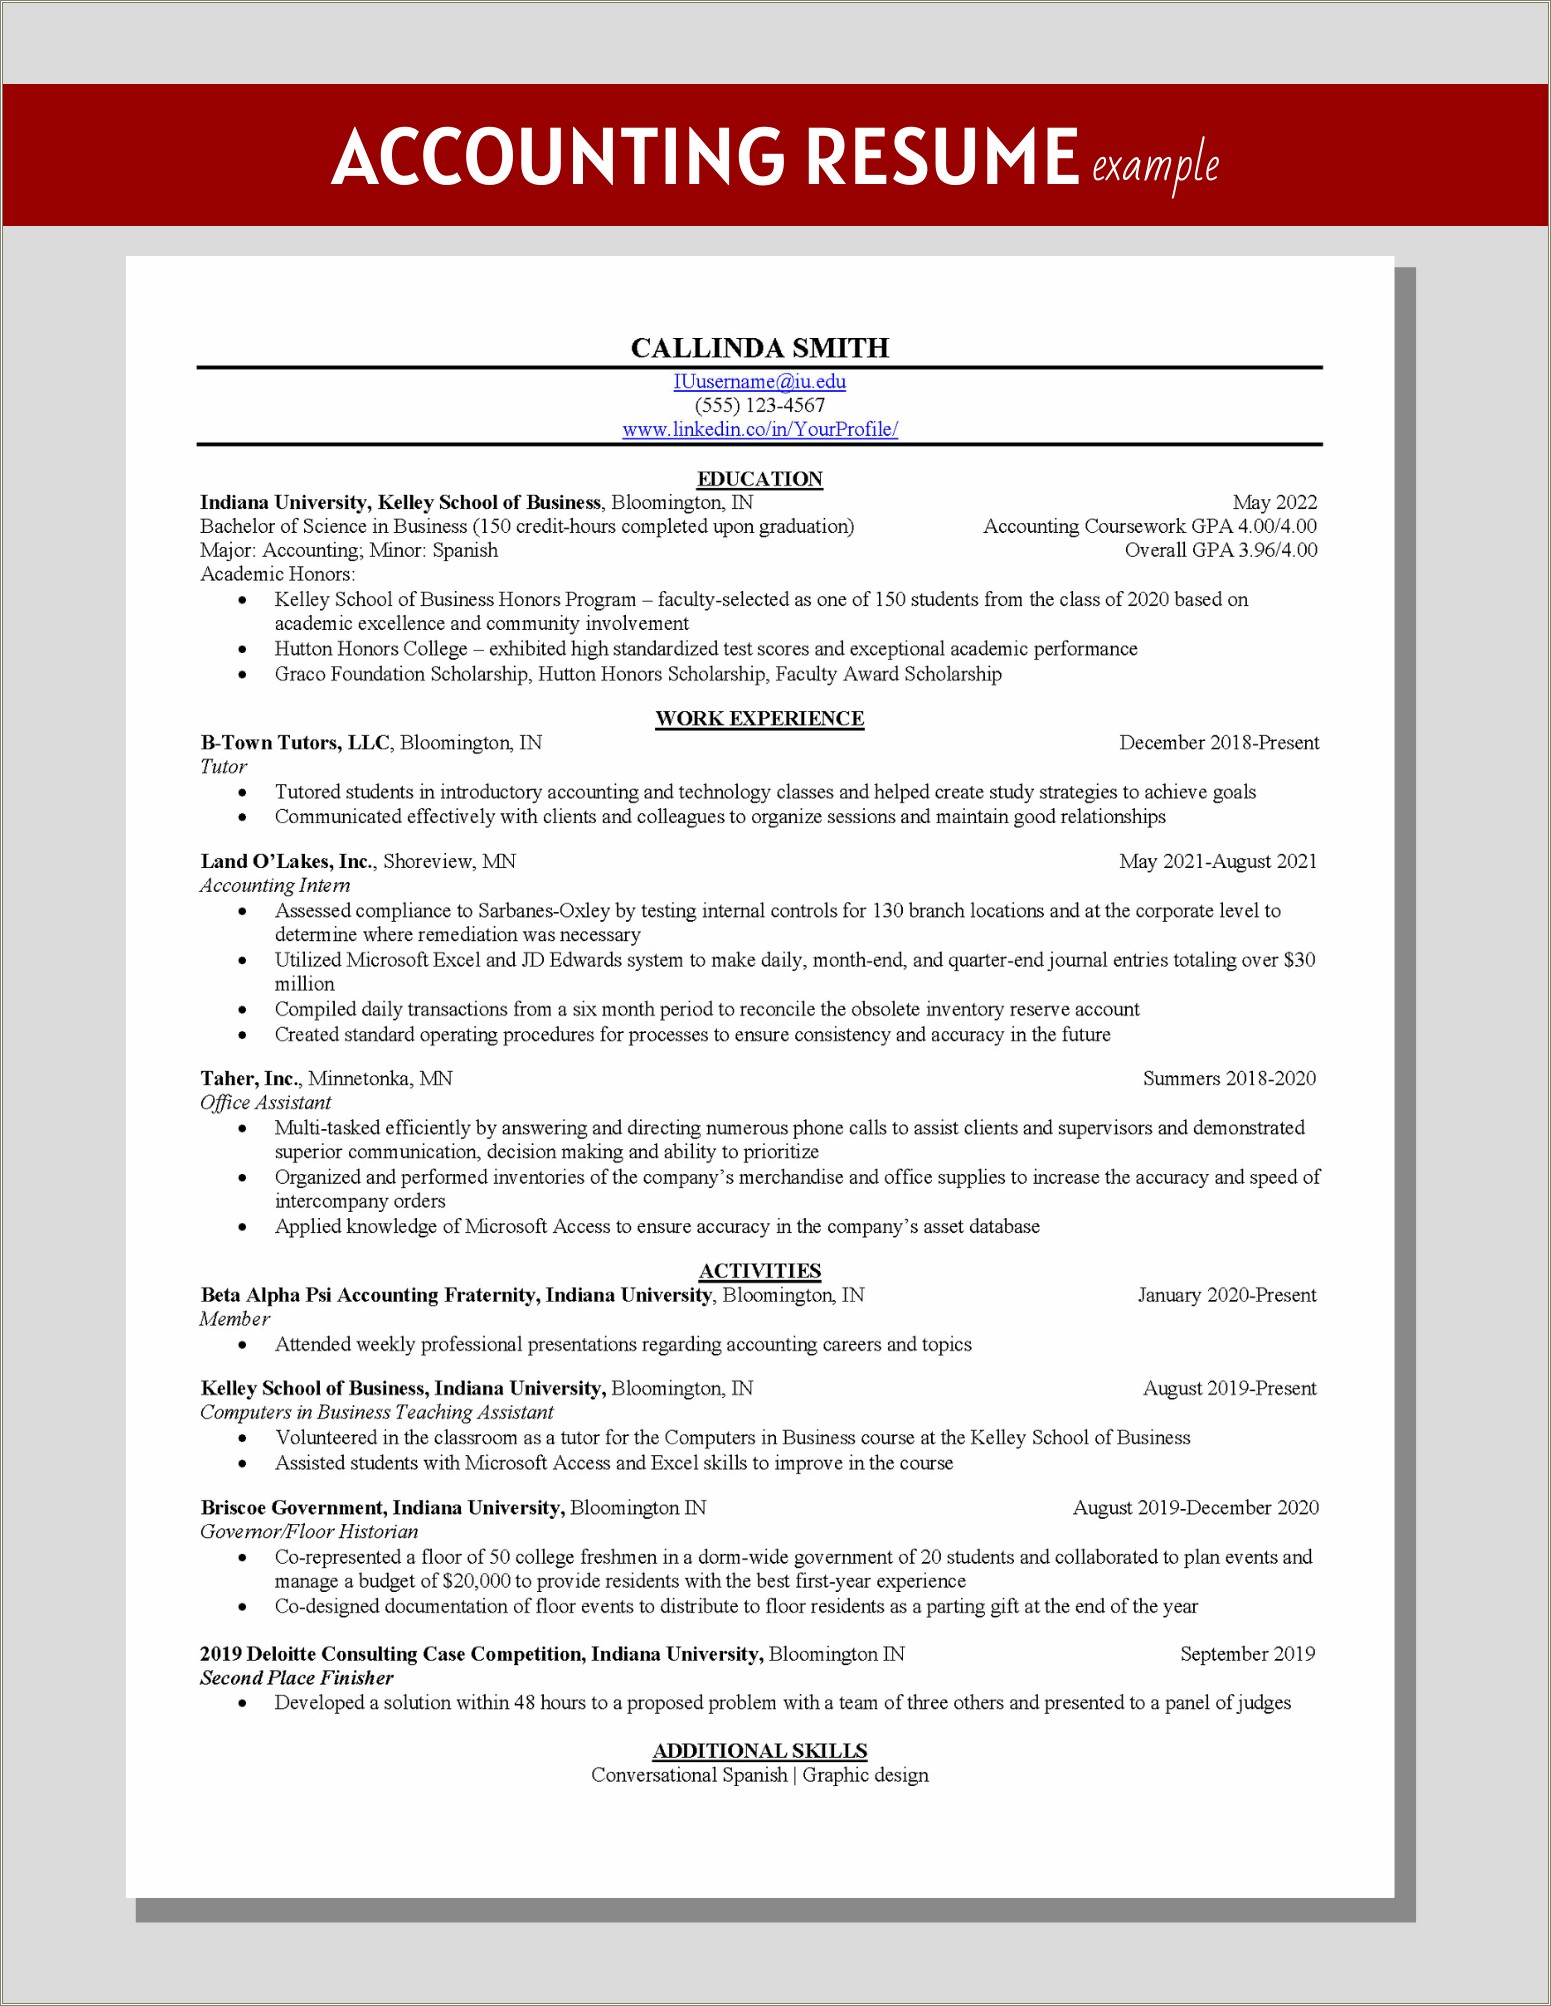 Accounting Skills And Knowledge In Resume